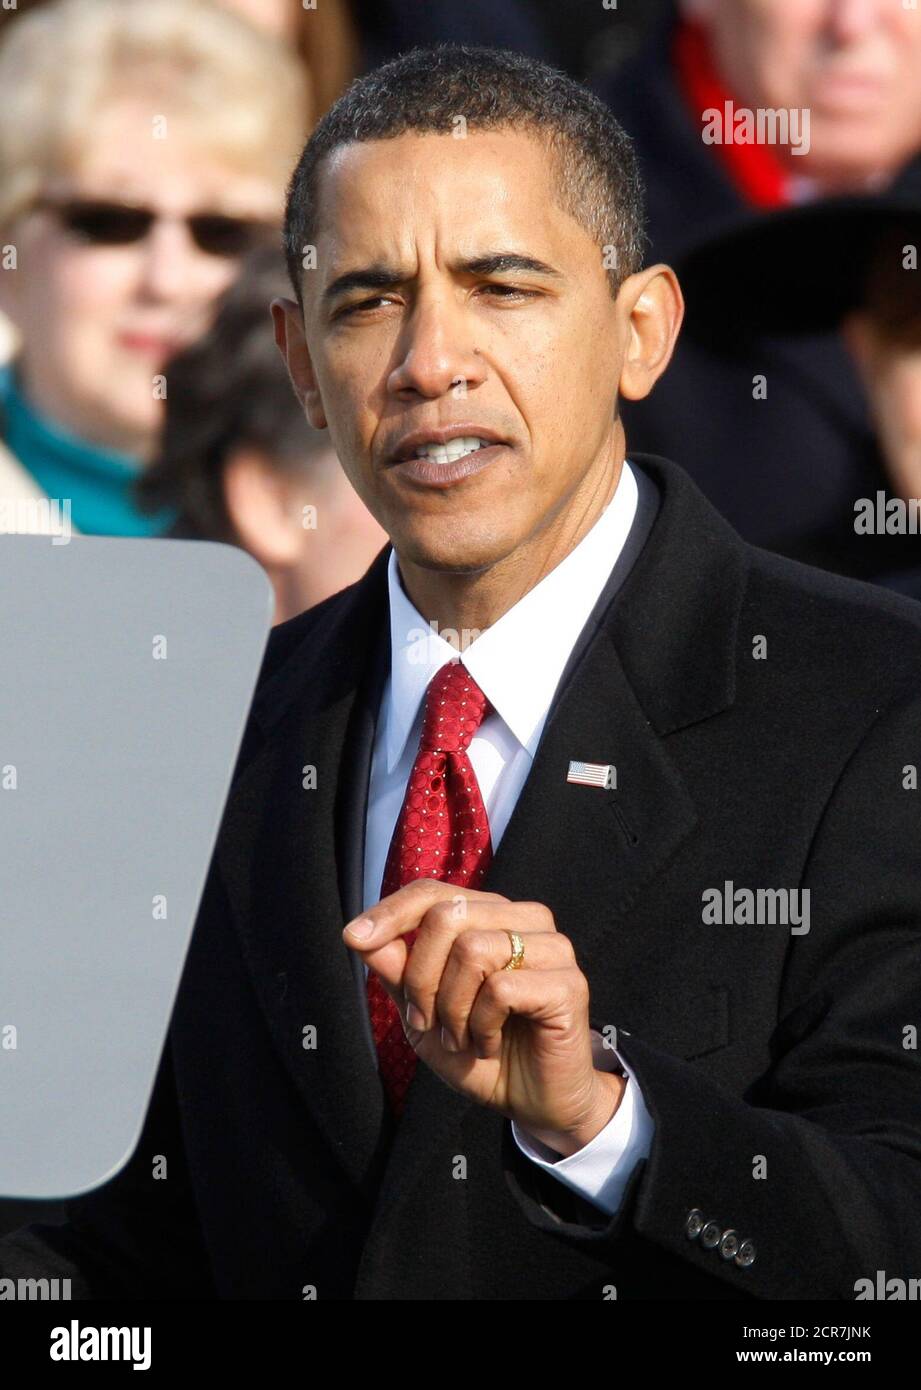 Barack Obama, the 44th President of the United States, delivers his Inaugural Address in Washington, January 20, 2009.  REUTERS/Jim Bourg (UNITED STATES) Stock Photo